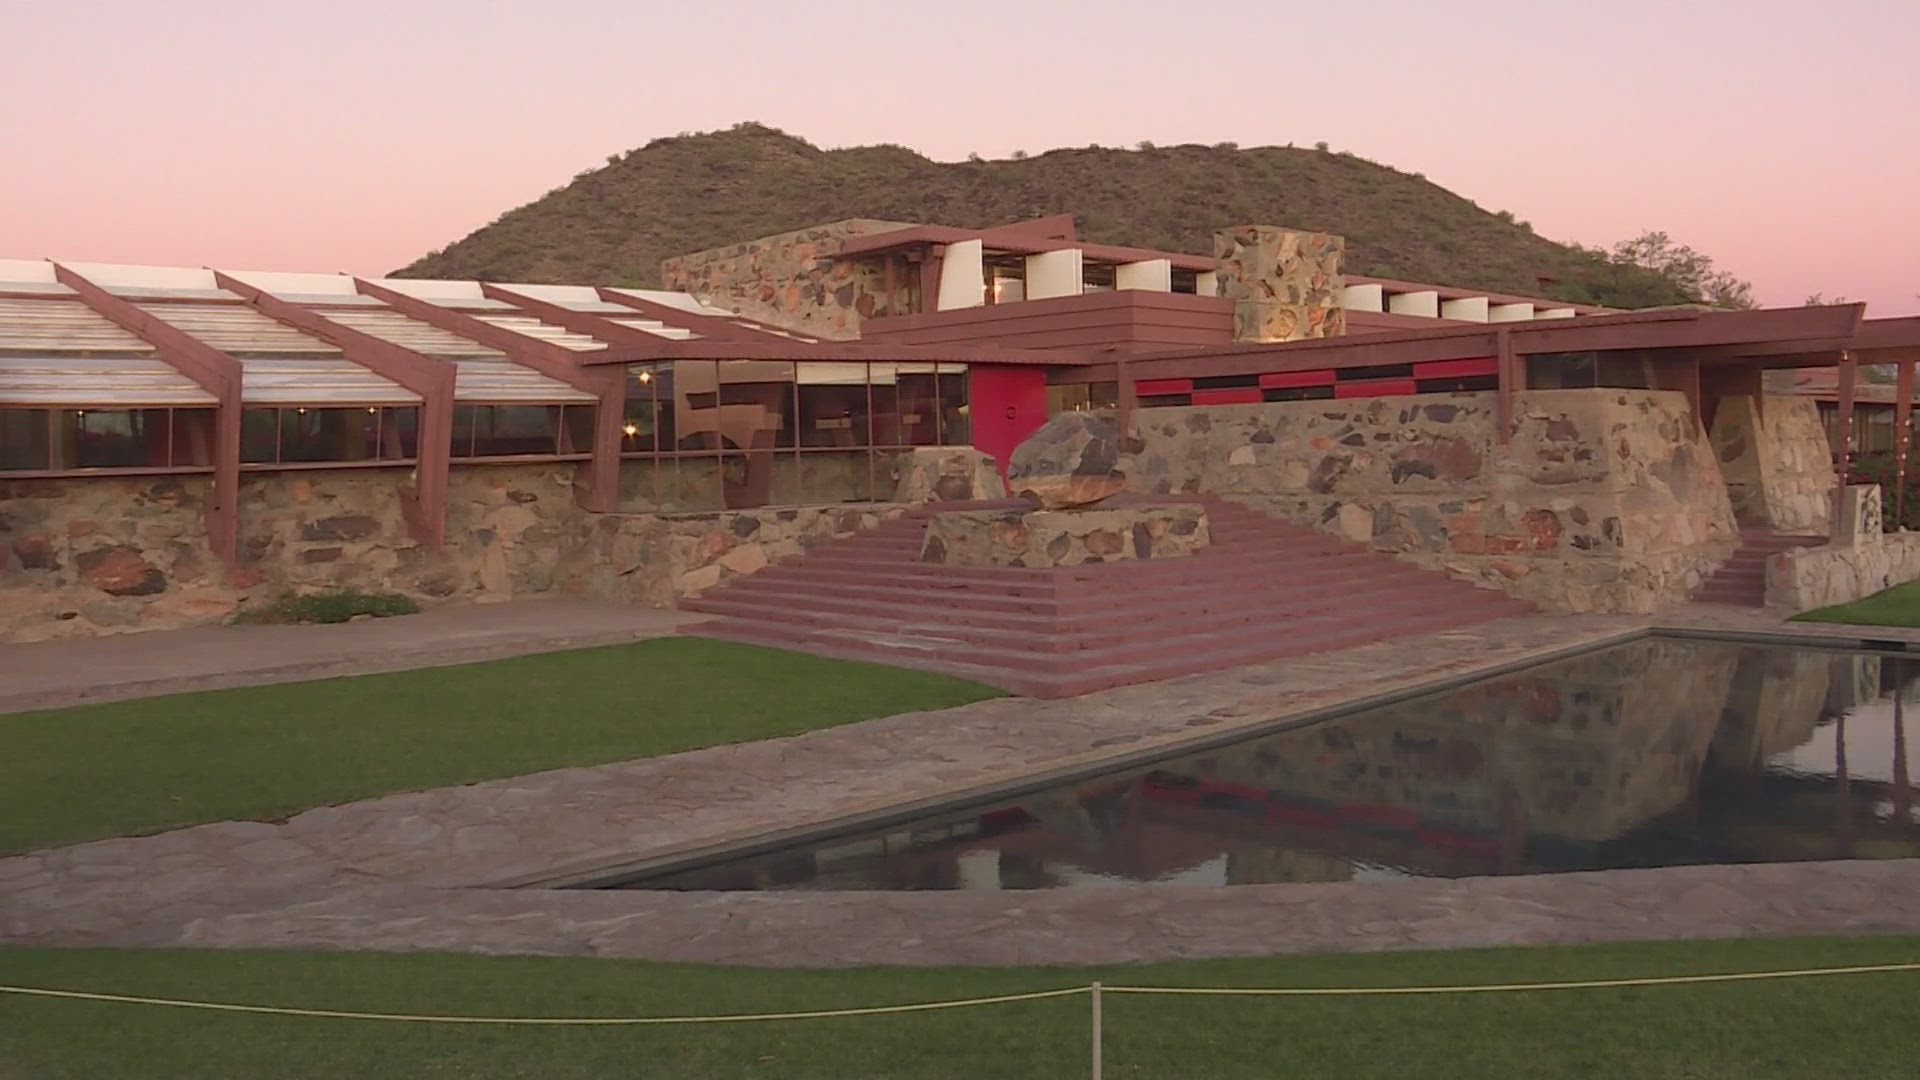 Taliesin West was Frank Lloyd Wright's winter oasis and its architecture has had a worldwide impact.